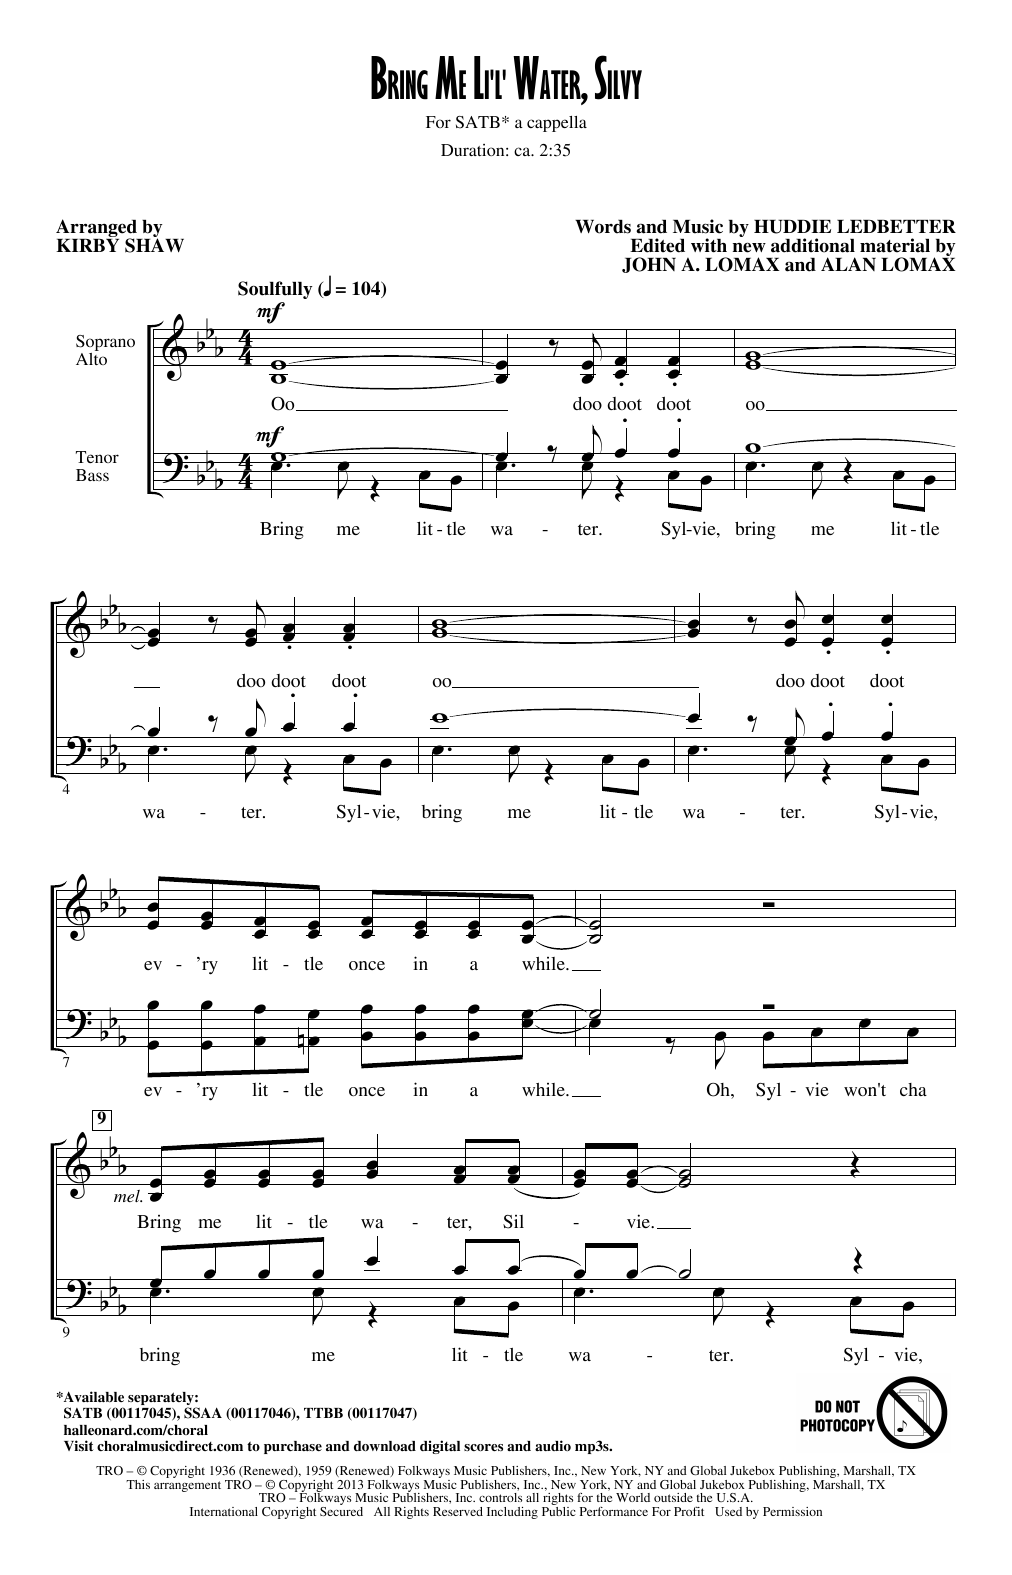 Download Kirby Shaw Bring Me Lil'l Water, Sylvie Sheet Music